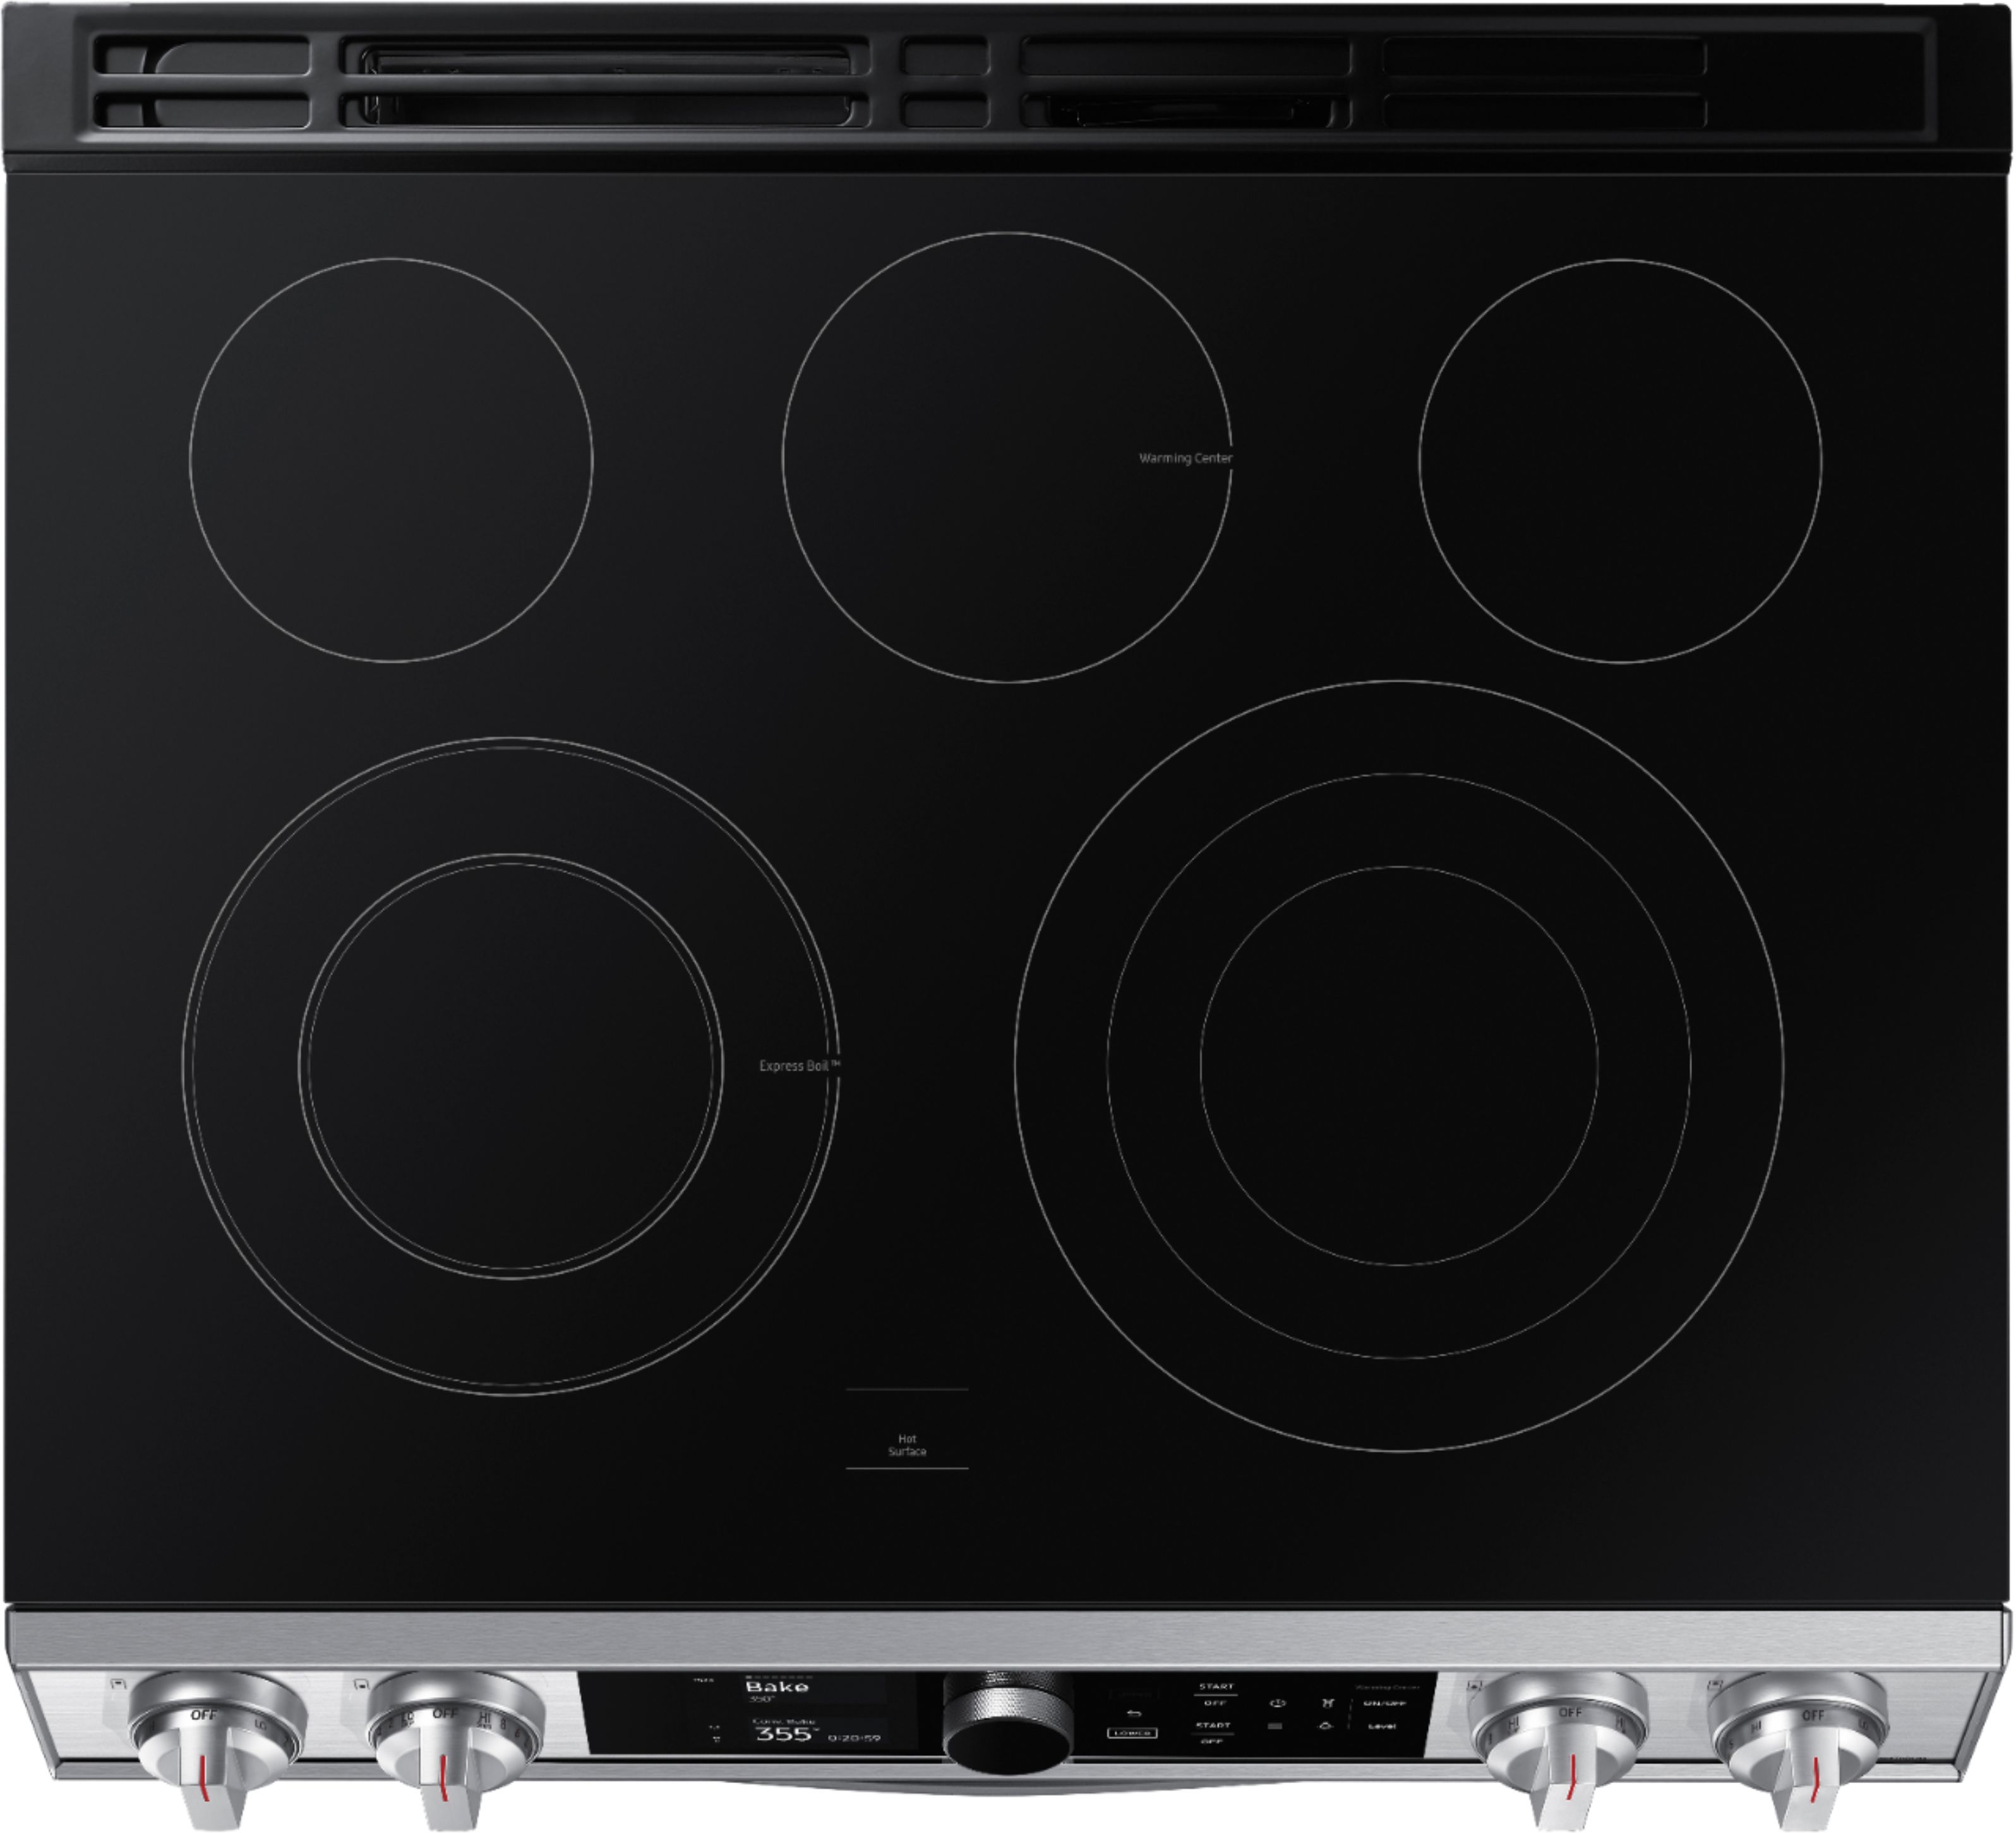 Samsung 6.3 Cu. Ft. Front Control Slide-in Electric Range with Wi-Fi in  Stainless Steel